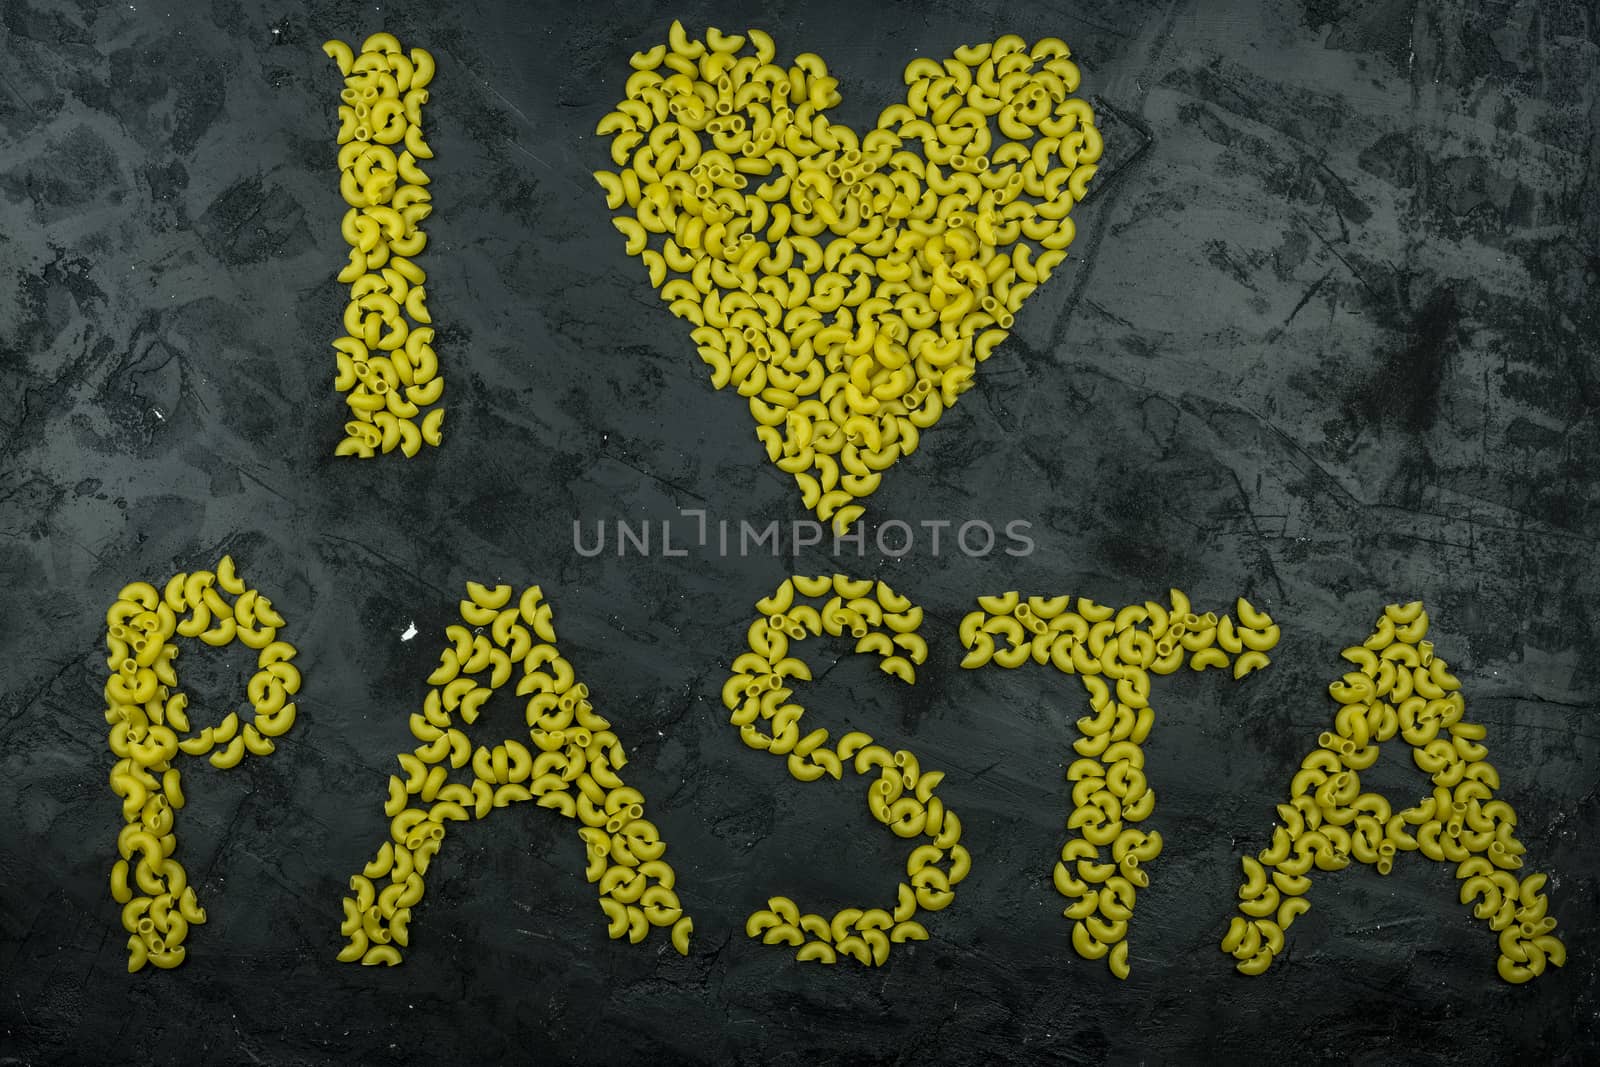 Pasta in the shape of a heart on a black background.